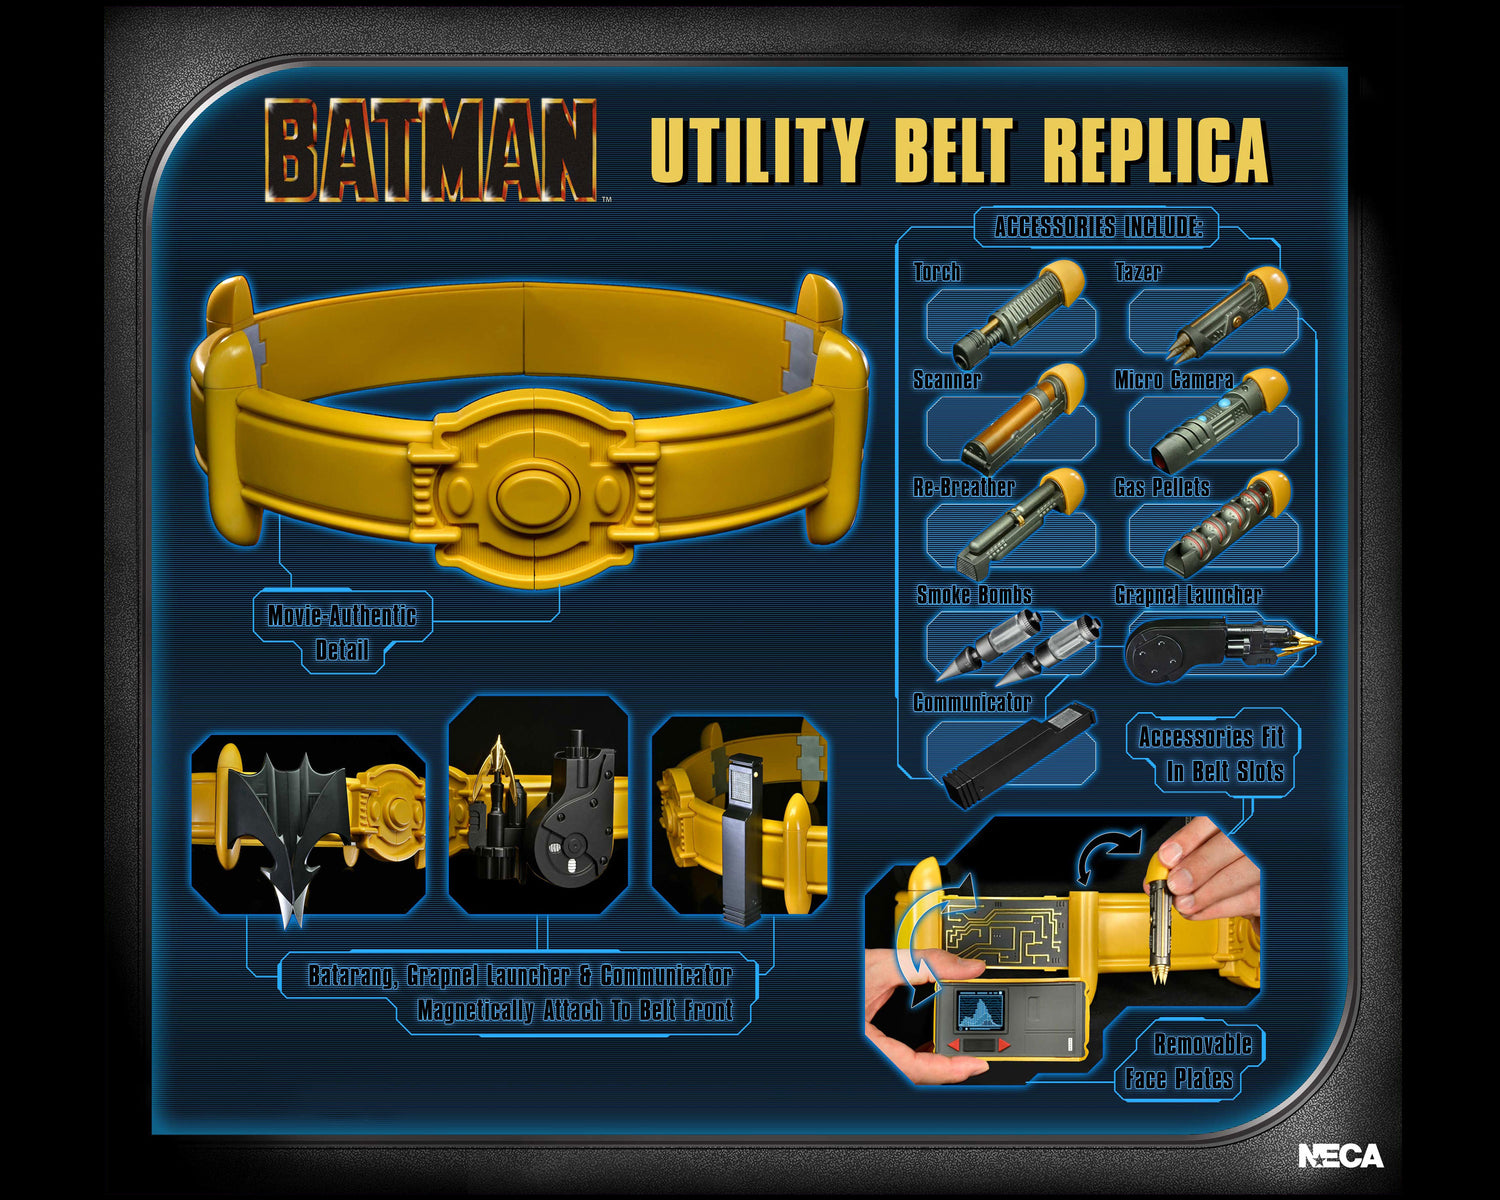 Complete diagram of what's included with the NECA 1989 Batman Utility Belt Bundle